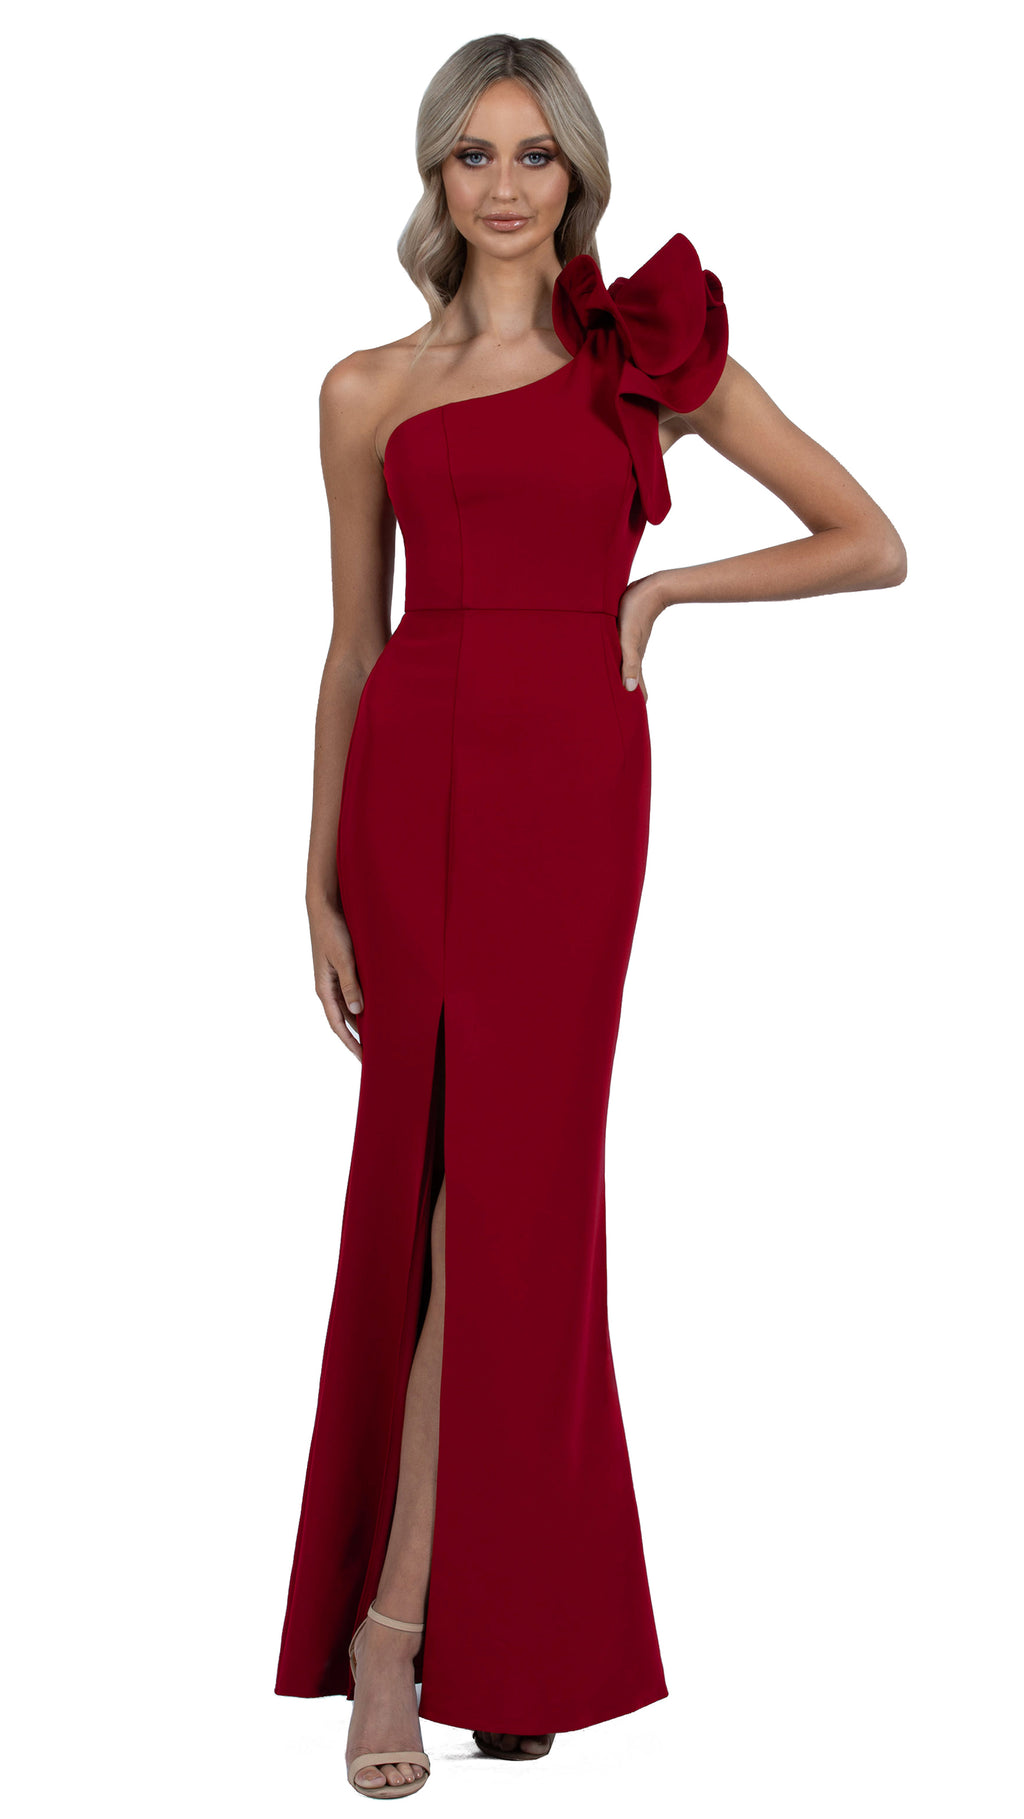 Sue Frill Gown in Burgundy